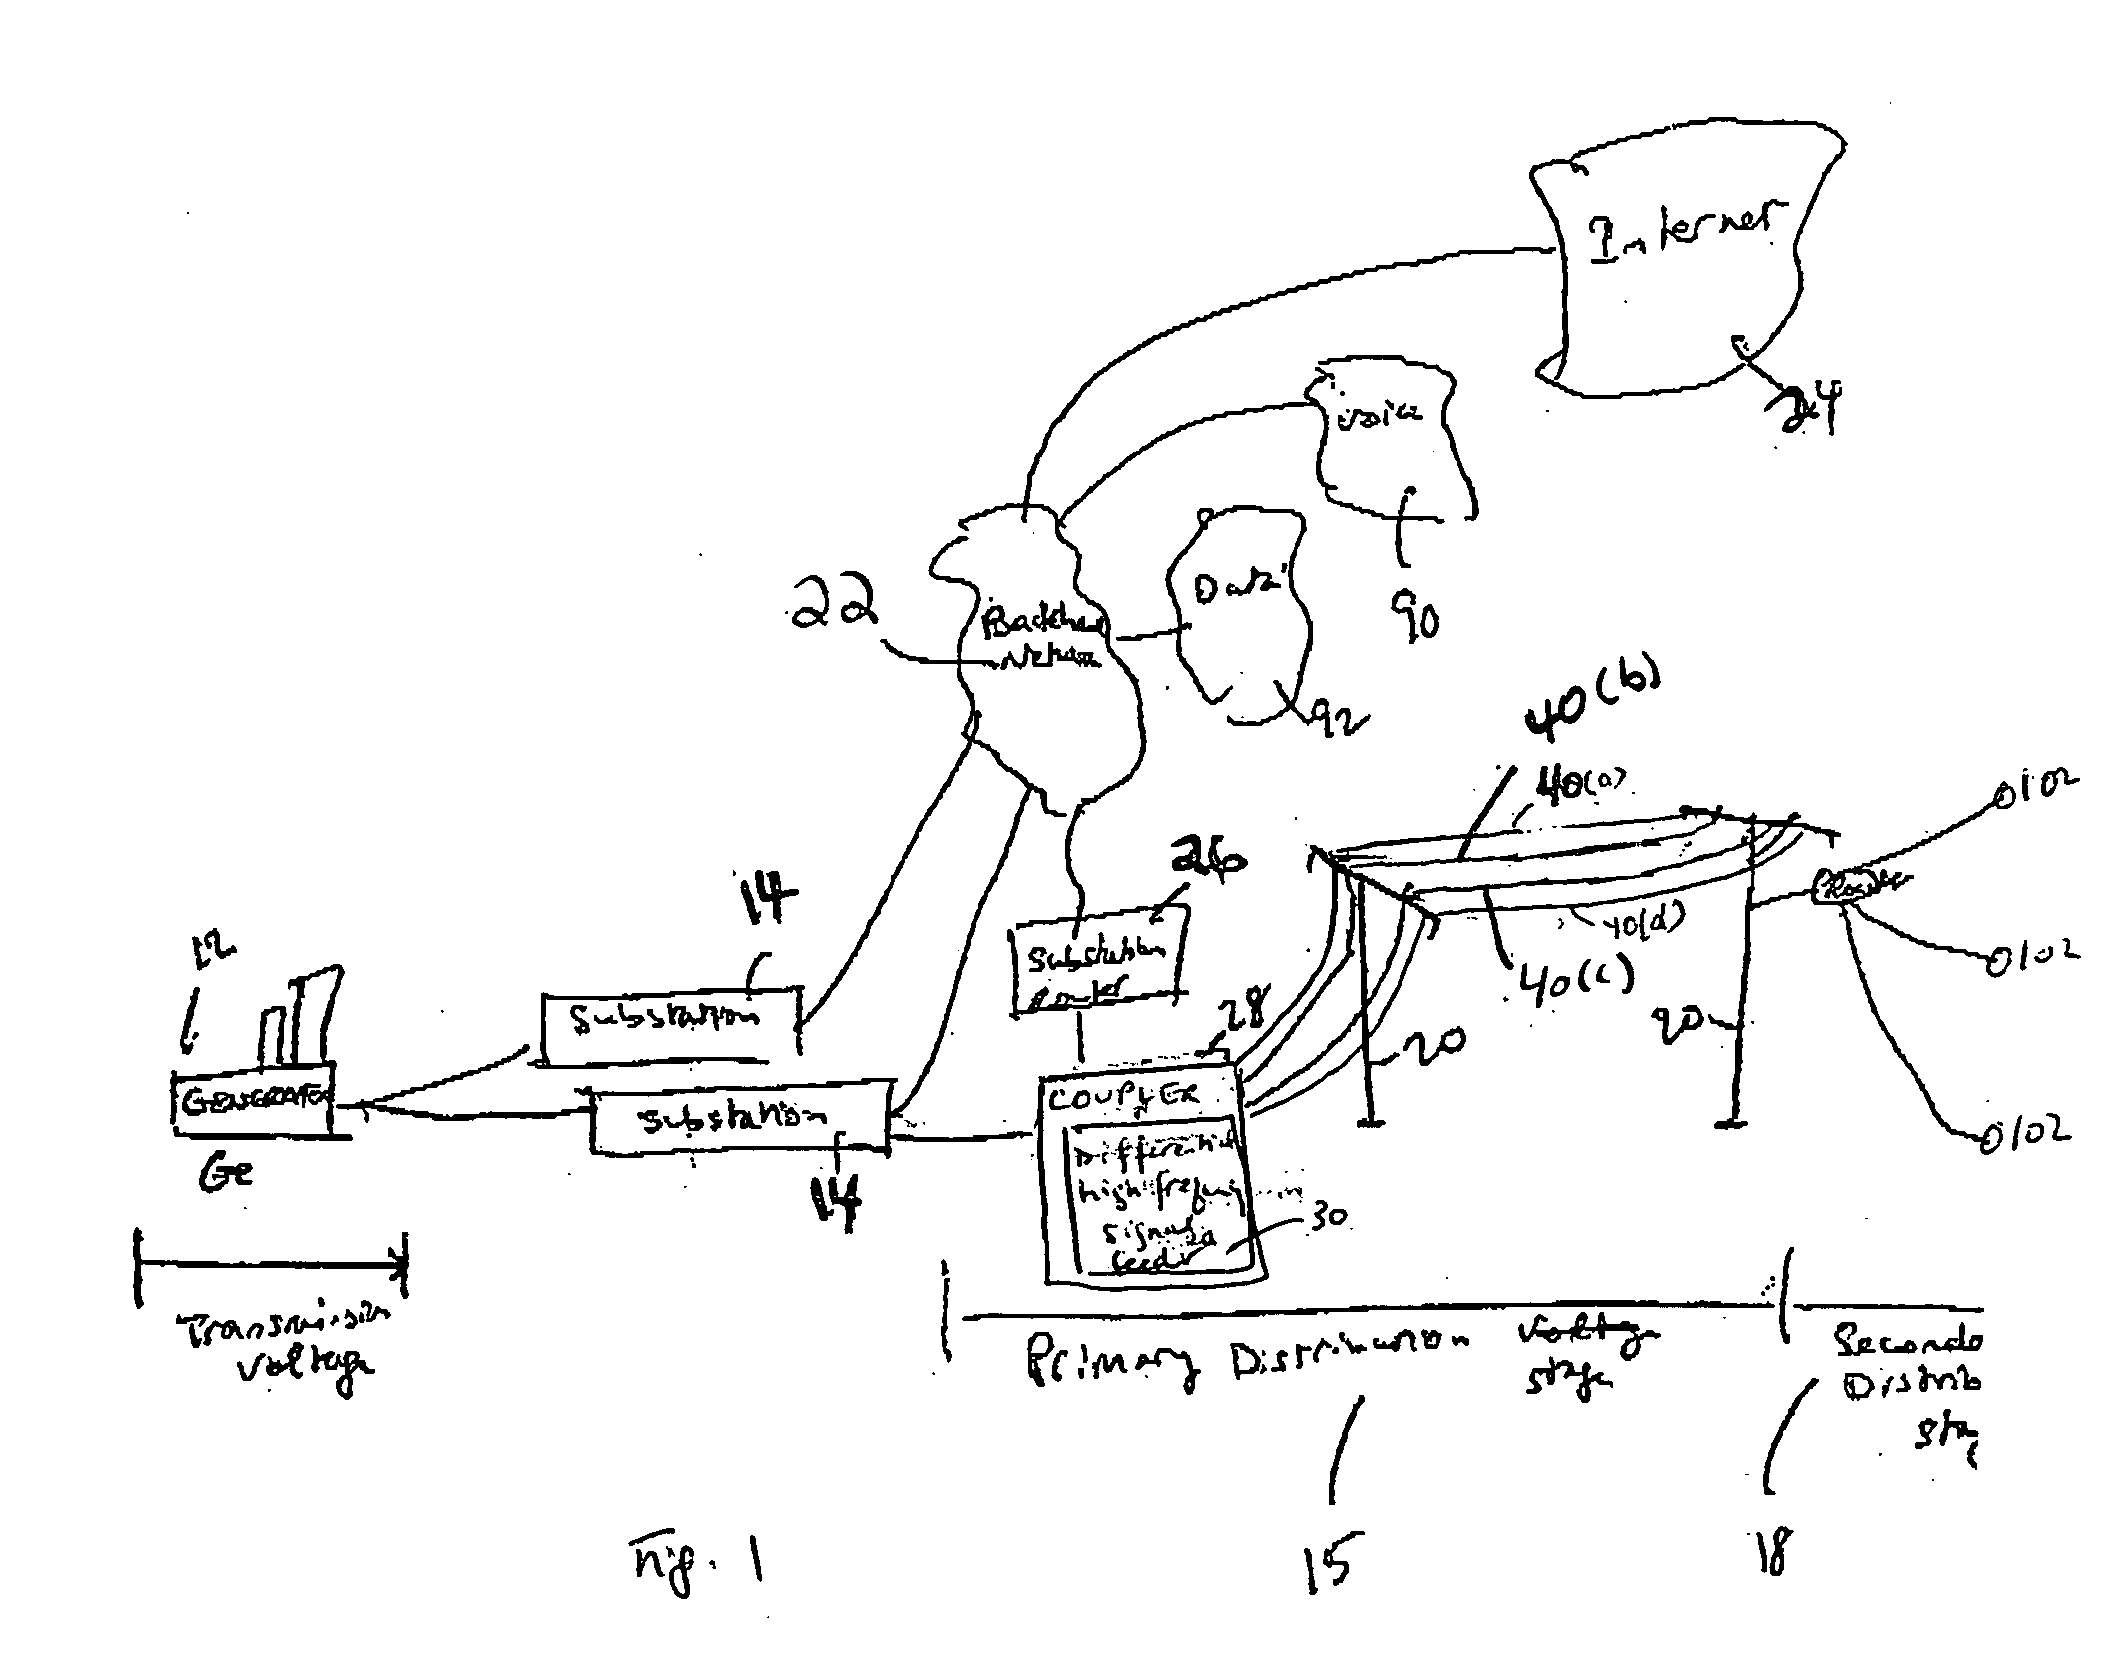 System and method for reducing radiation when distributing broadband communication signals over power lines